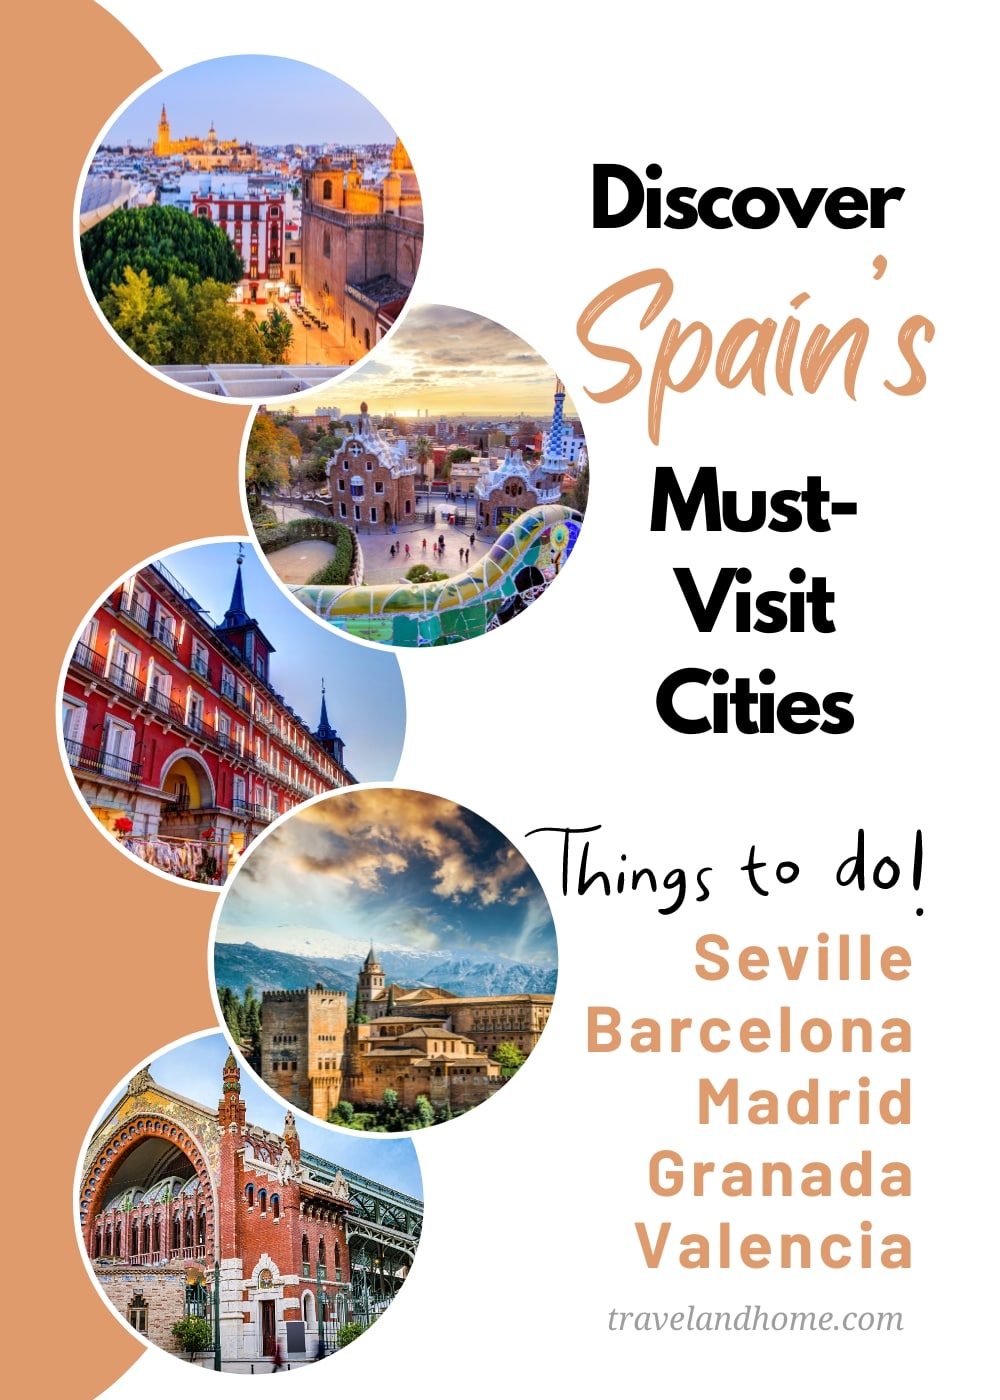 Discover Spain's Top Must Visit Cities, Granada, Valencia, Seville, Barcelona, Madrid, best things to do and places to see min